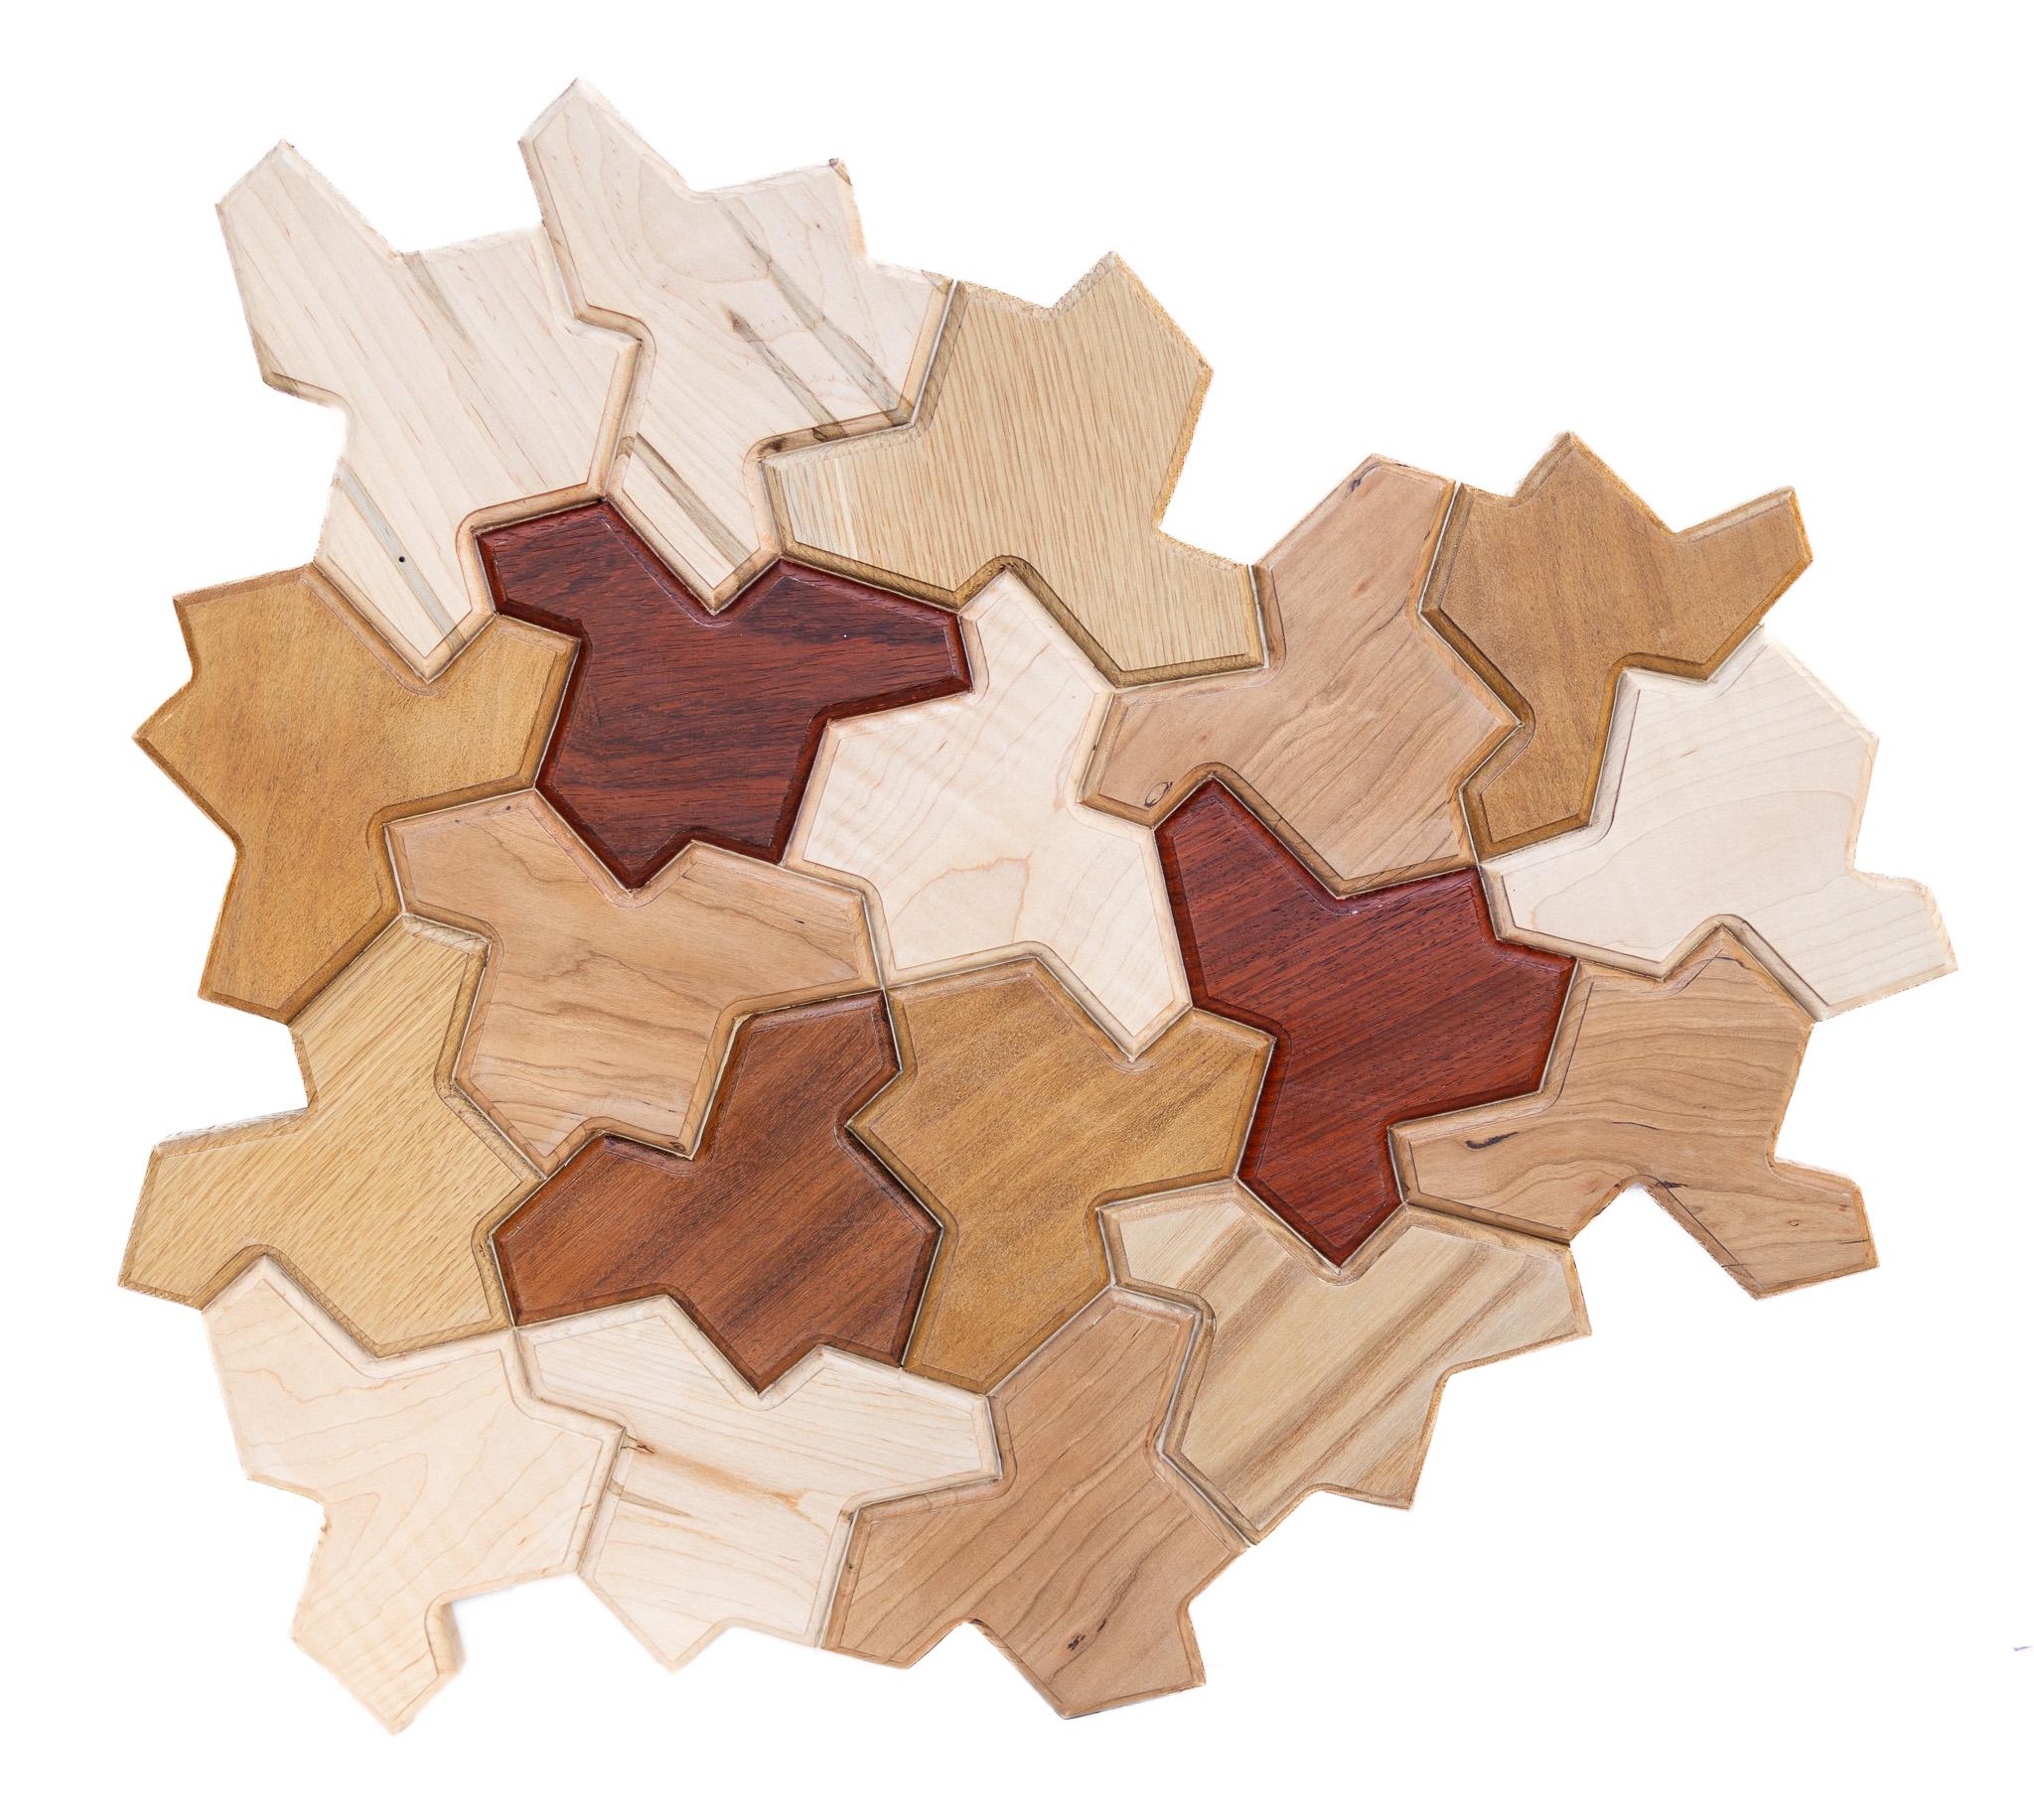 "Hats" Geometric Abstract Wooden Wall Sculpture 